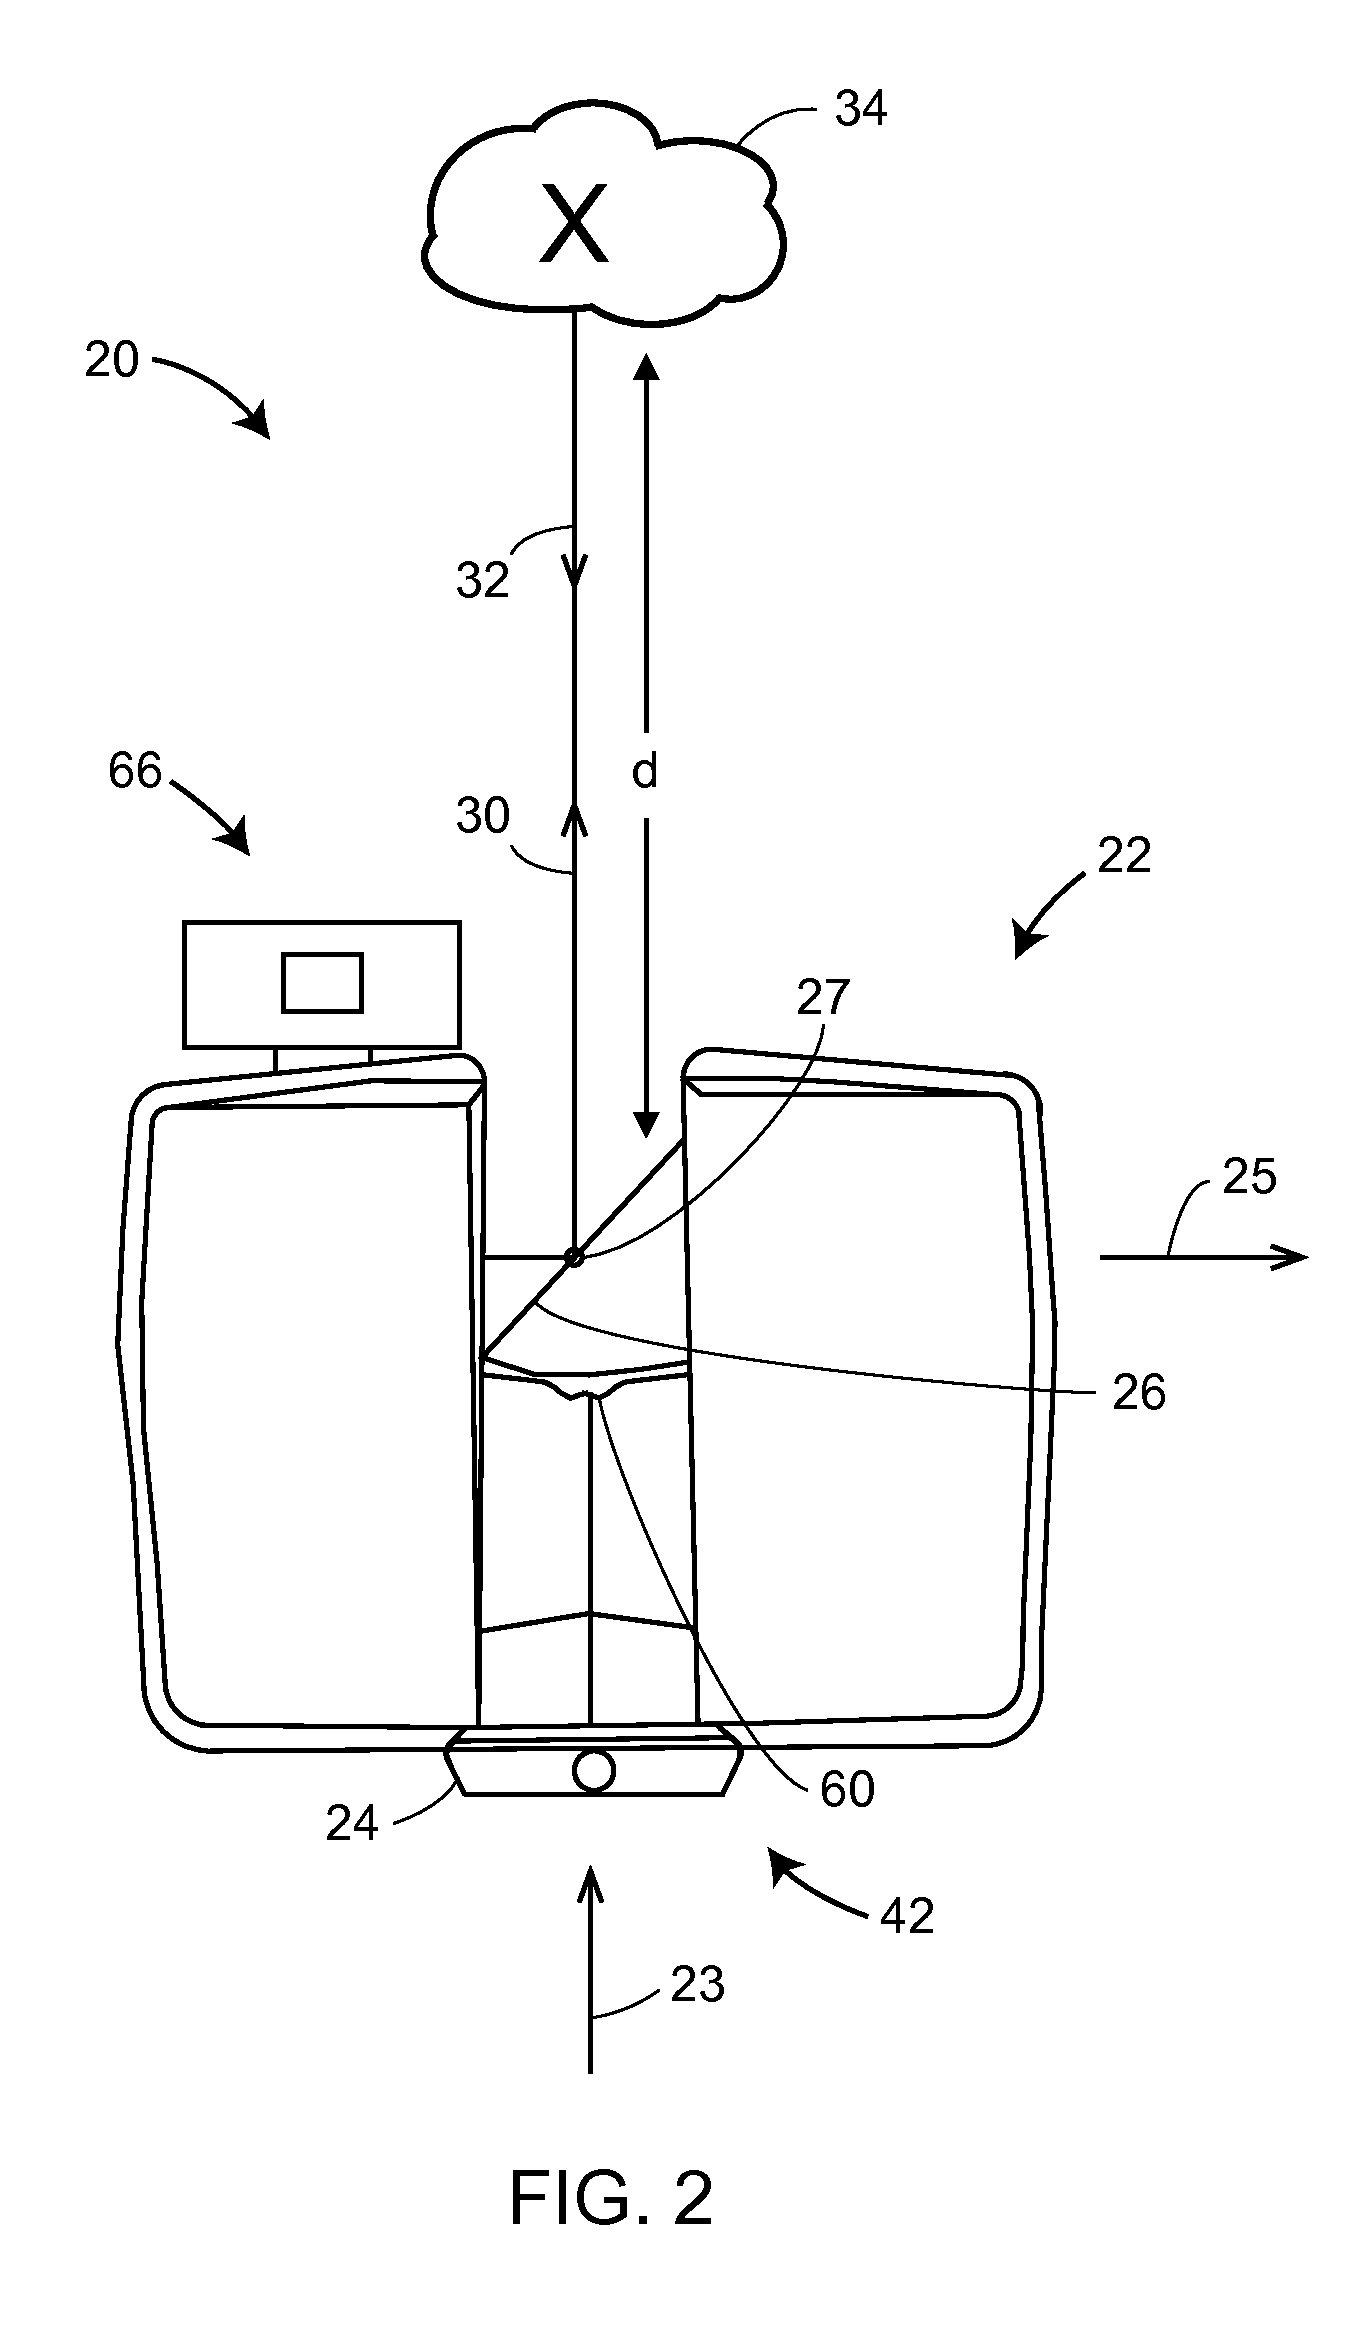 Intermediate two-dimensional scanning with a three-dimensional scanner to speed registration